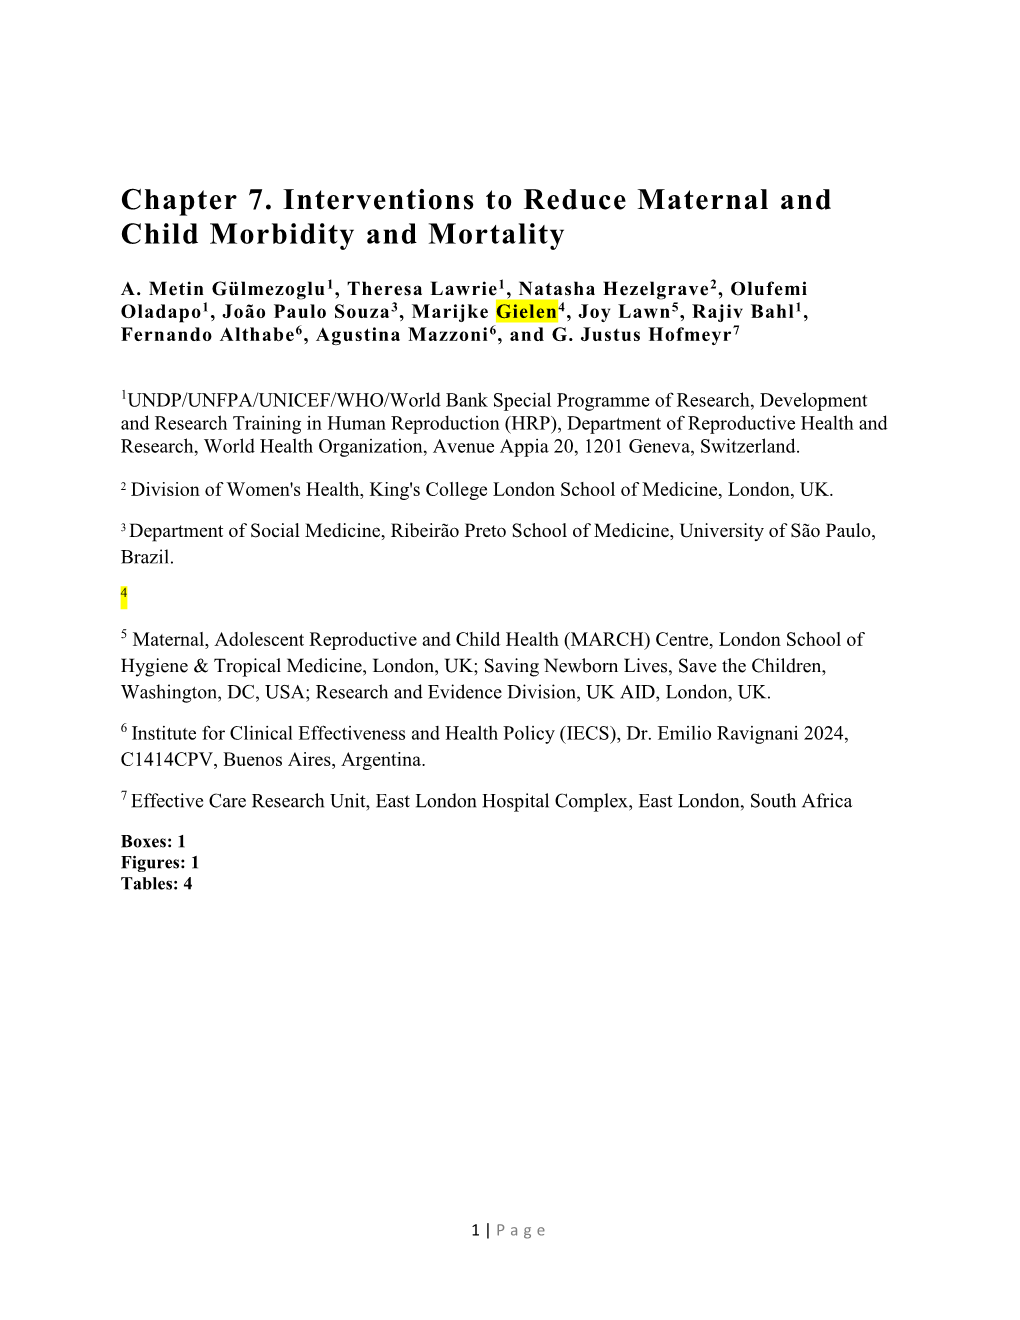 Chapter 7. Interventions to Reduce Maternal and Child Morbidity and Mortality